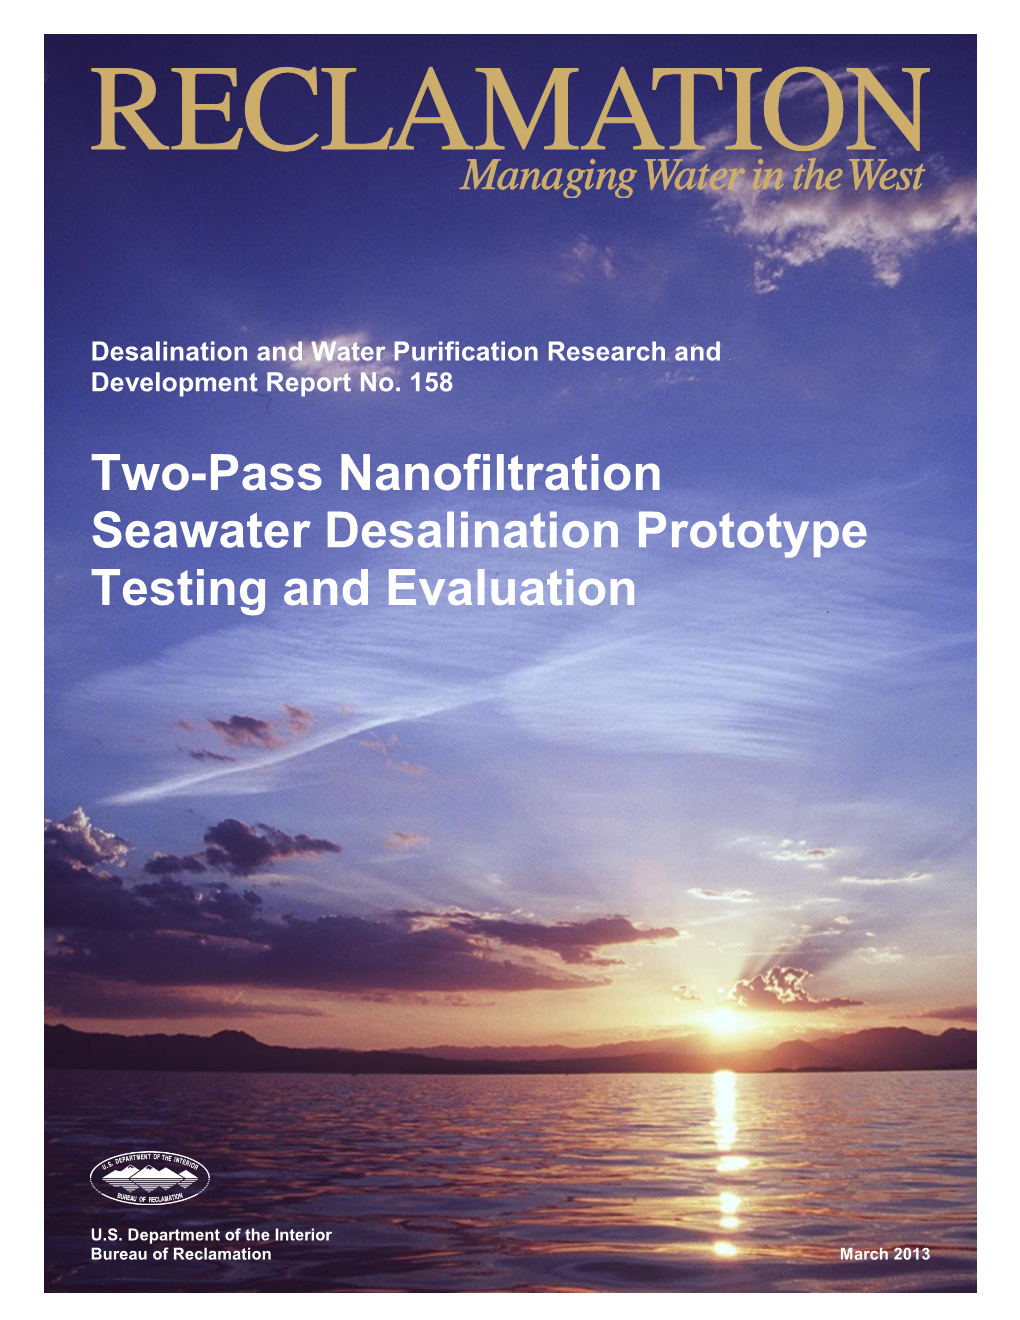 Two-Pass Nanofiltration Seawater Desalination Prototype Testing and Evaluation